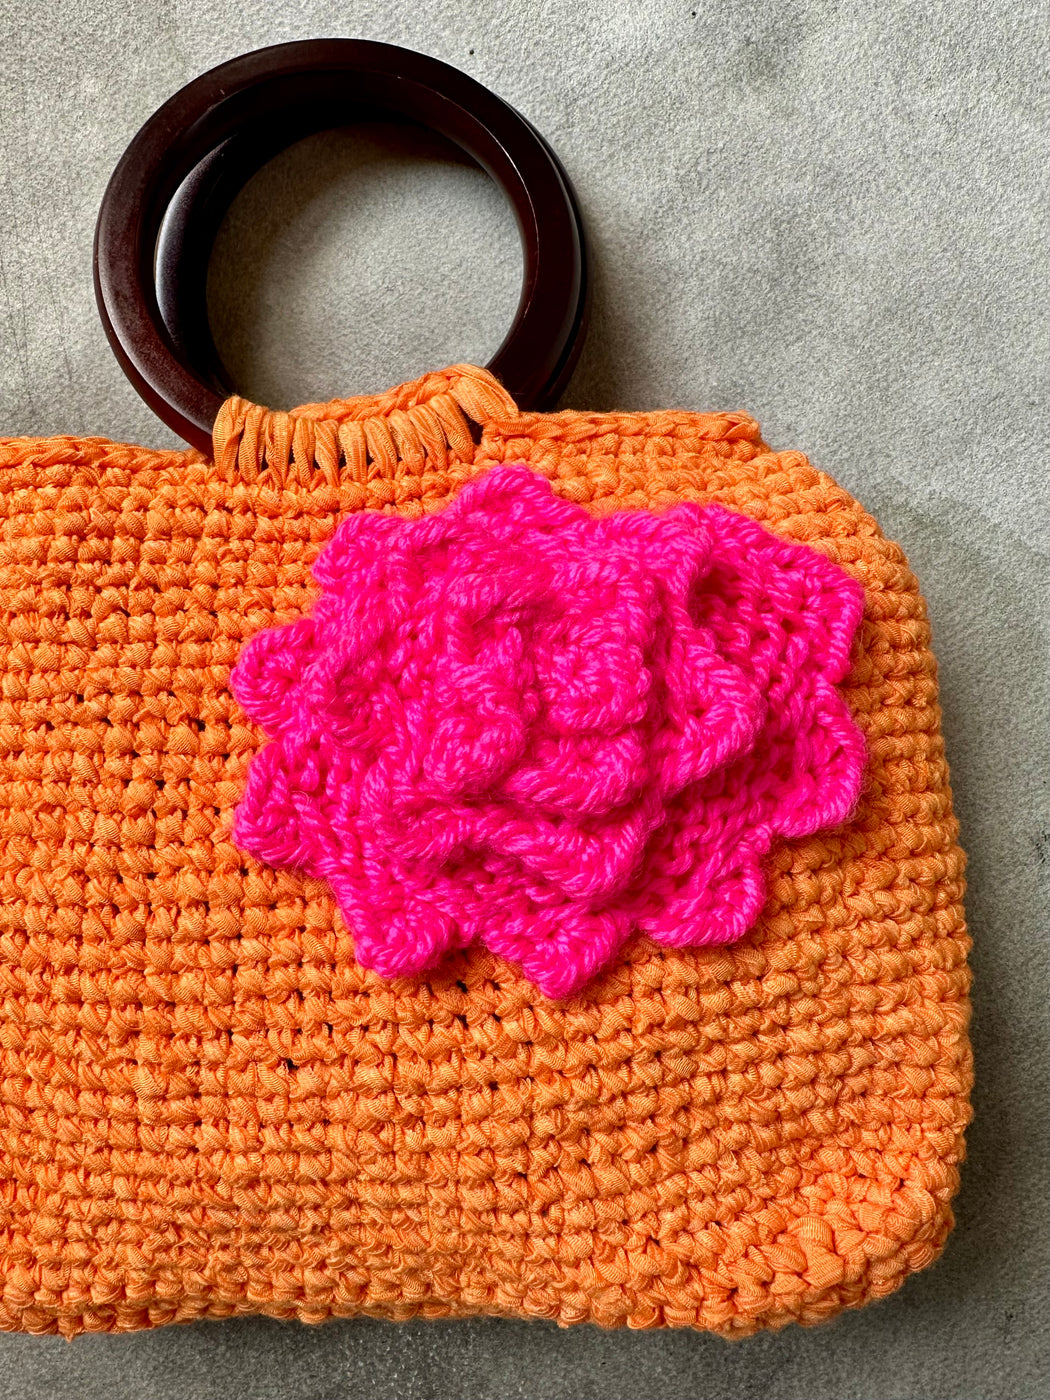 "Vibrance" Hand-Crocheted Purse by Albo